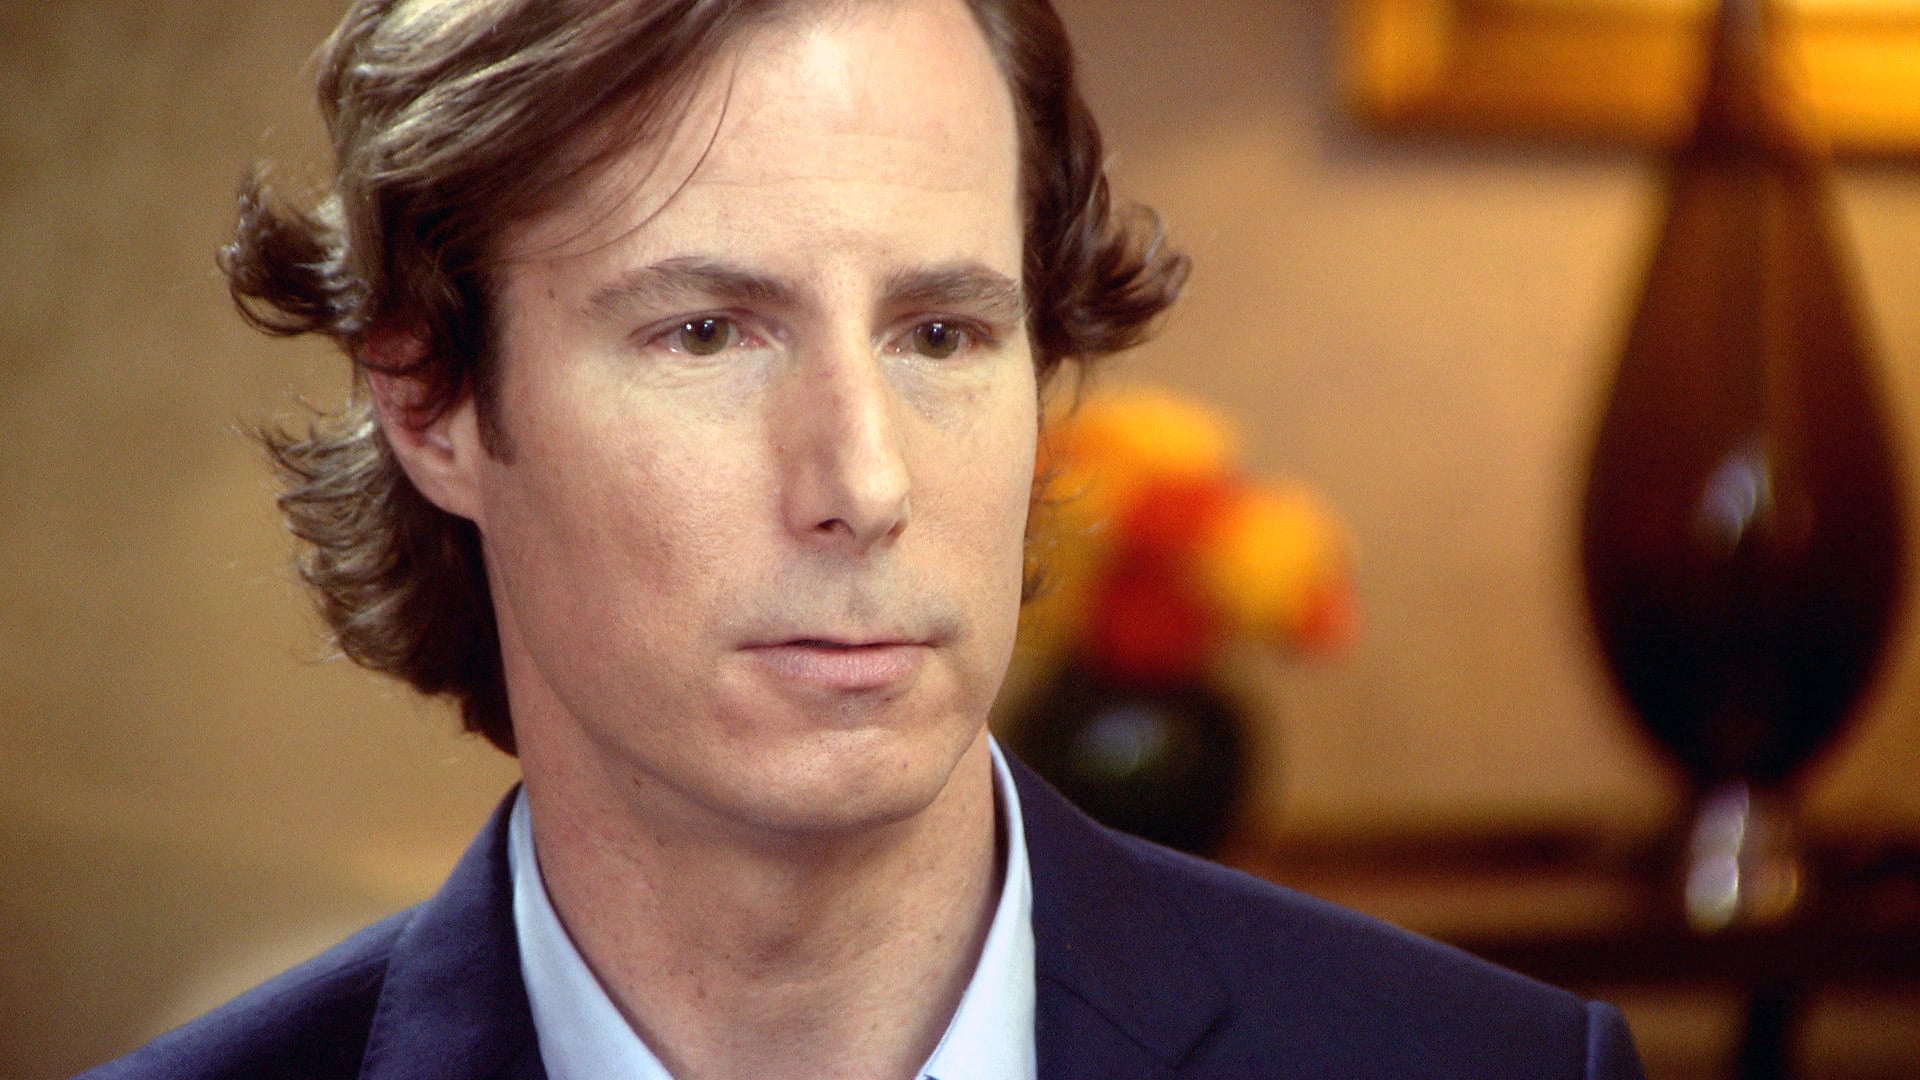 NEW YORK - OCTOBER 26:  60 Minutes interviewed Bernie Madoff's son, Andrew (shown), for a story that will provide the first inside account from the immediate family of the man who stole billions of dollars. Image is a screen grab. (Photo by CBS via Getty Images)